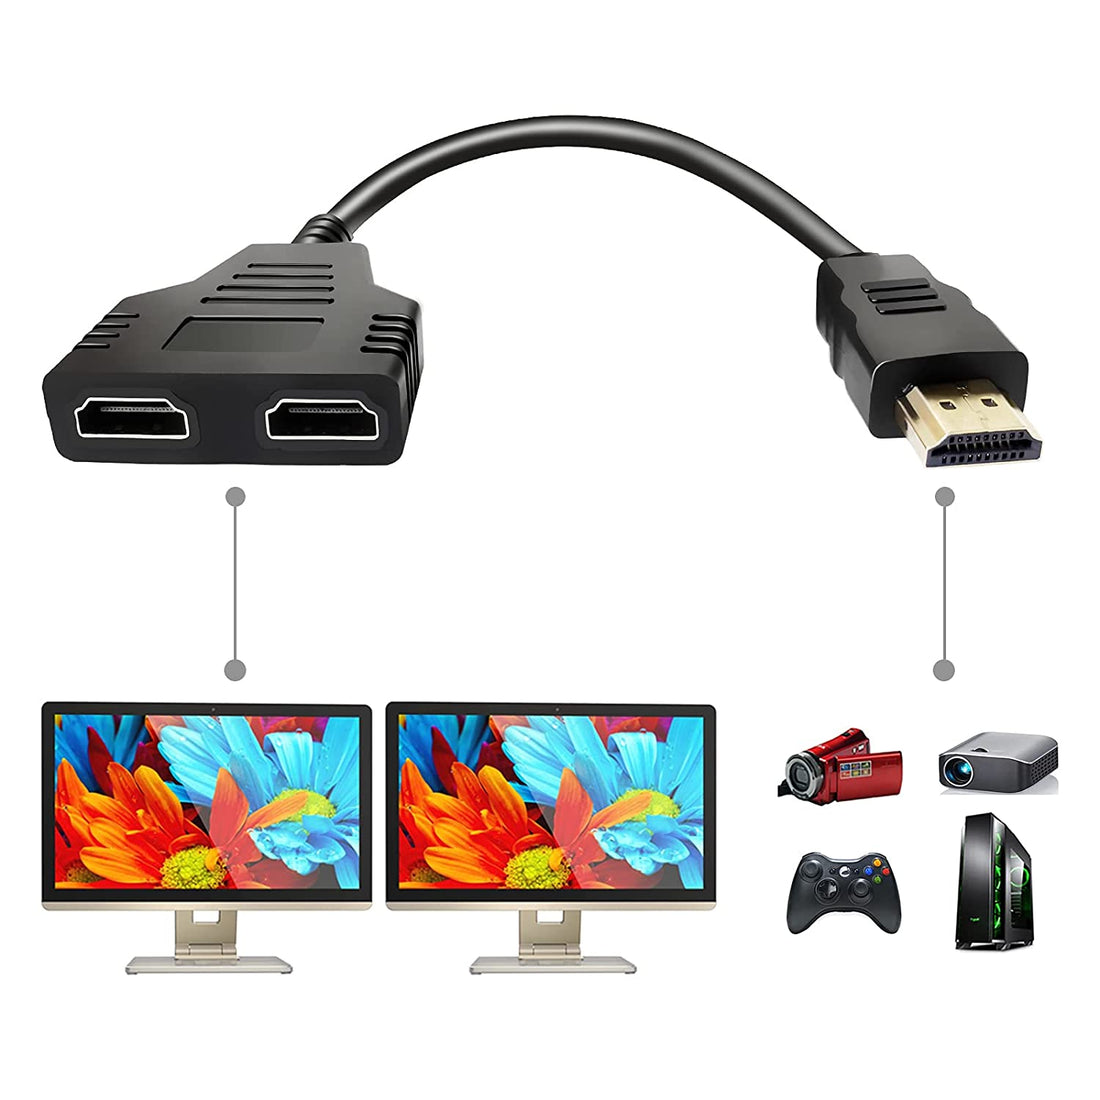 Why We Need an HDMI Splitter for Two Monitors